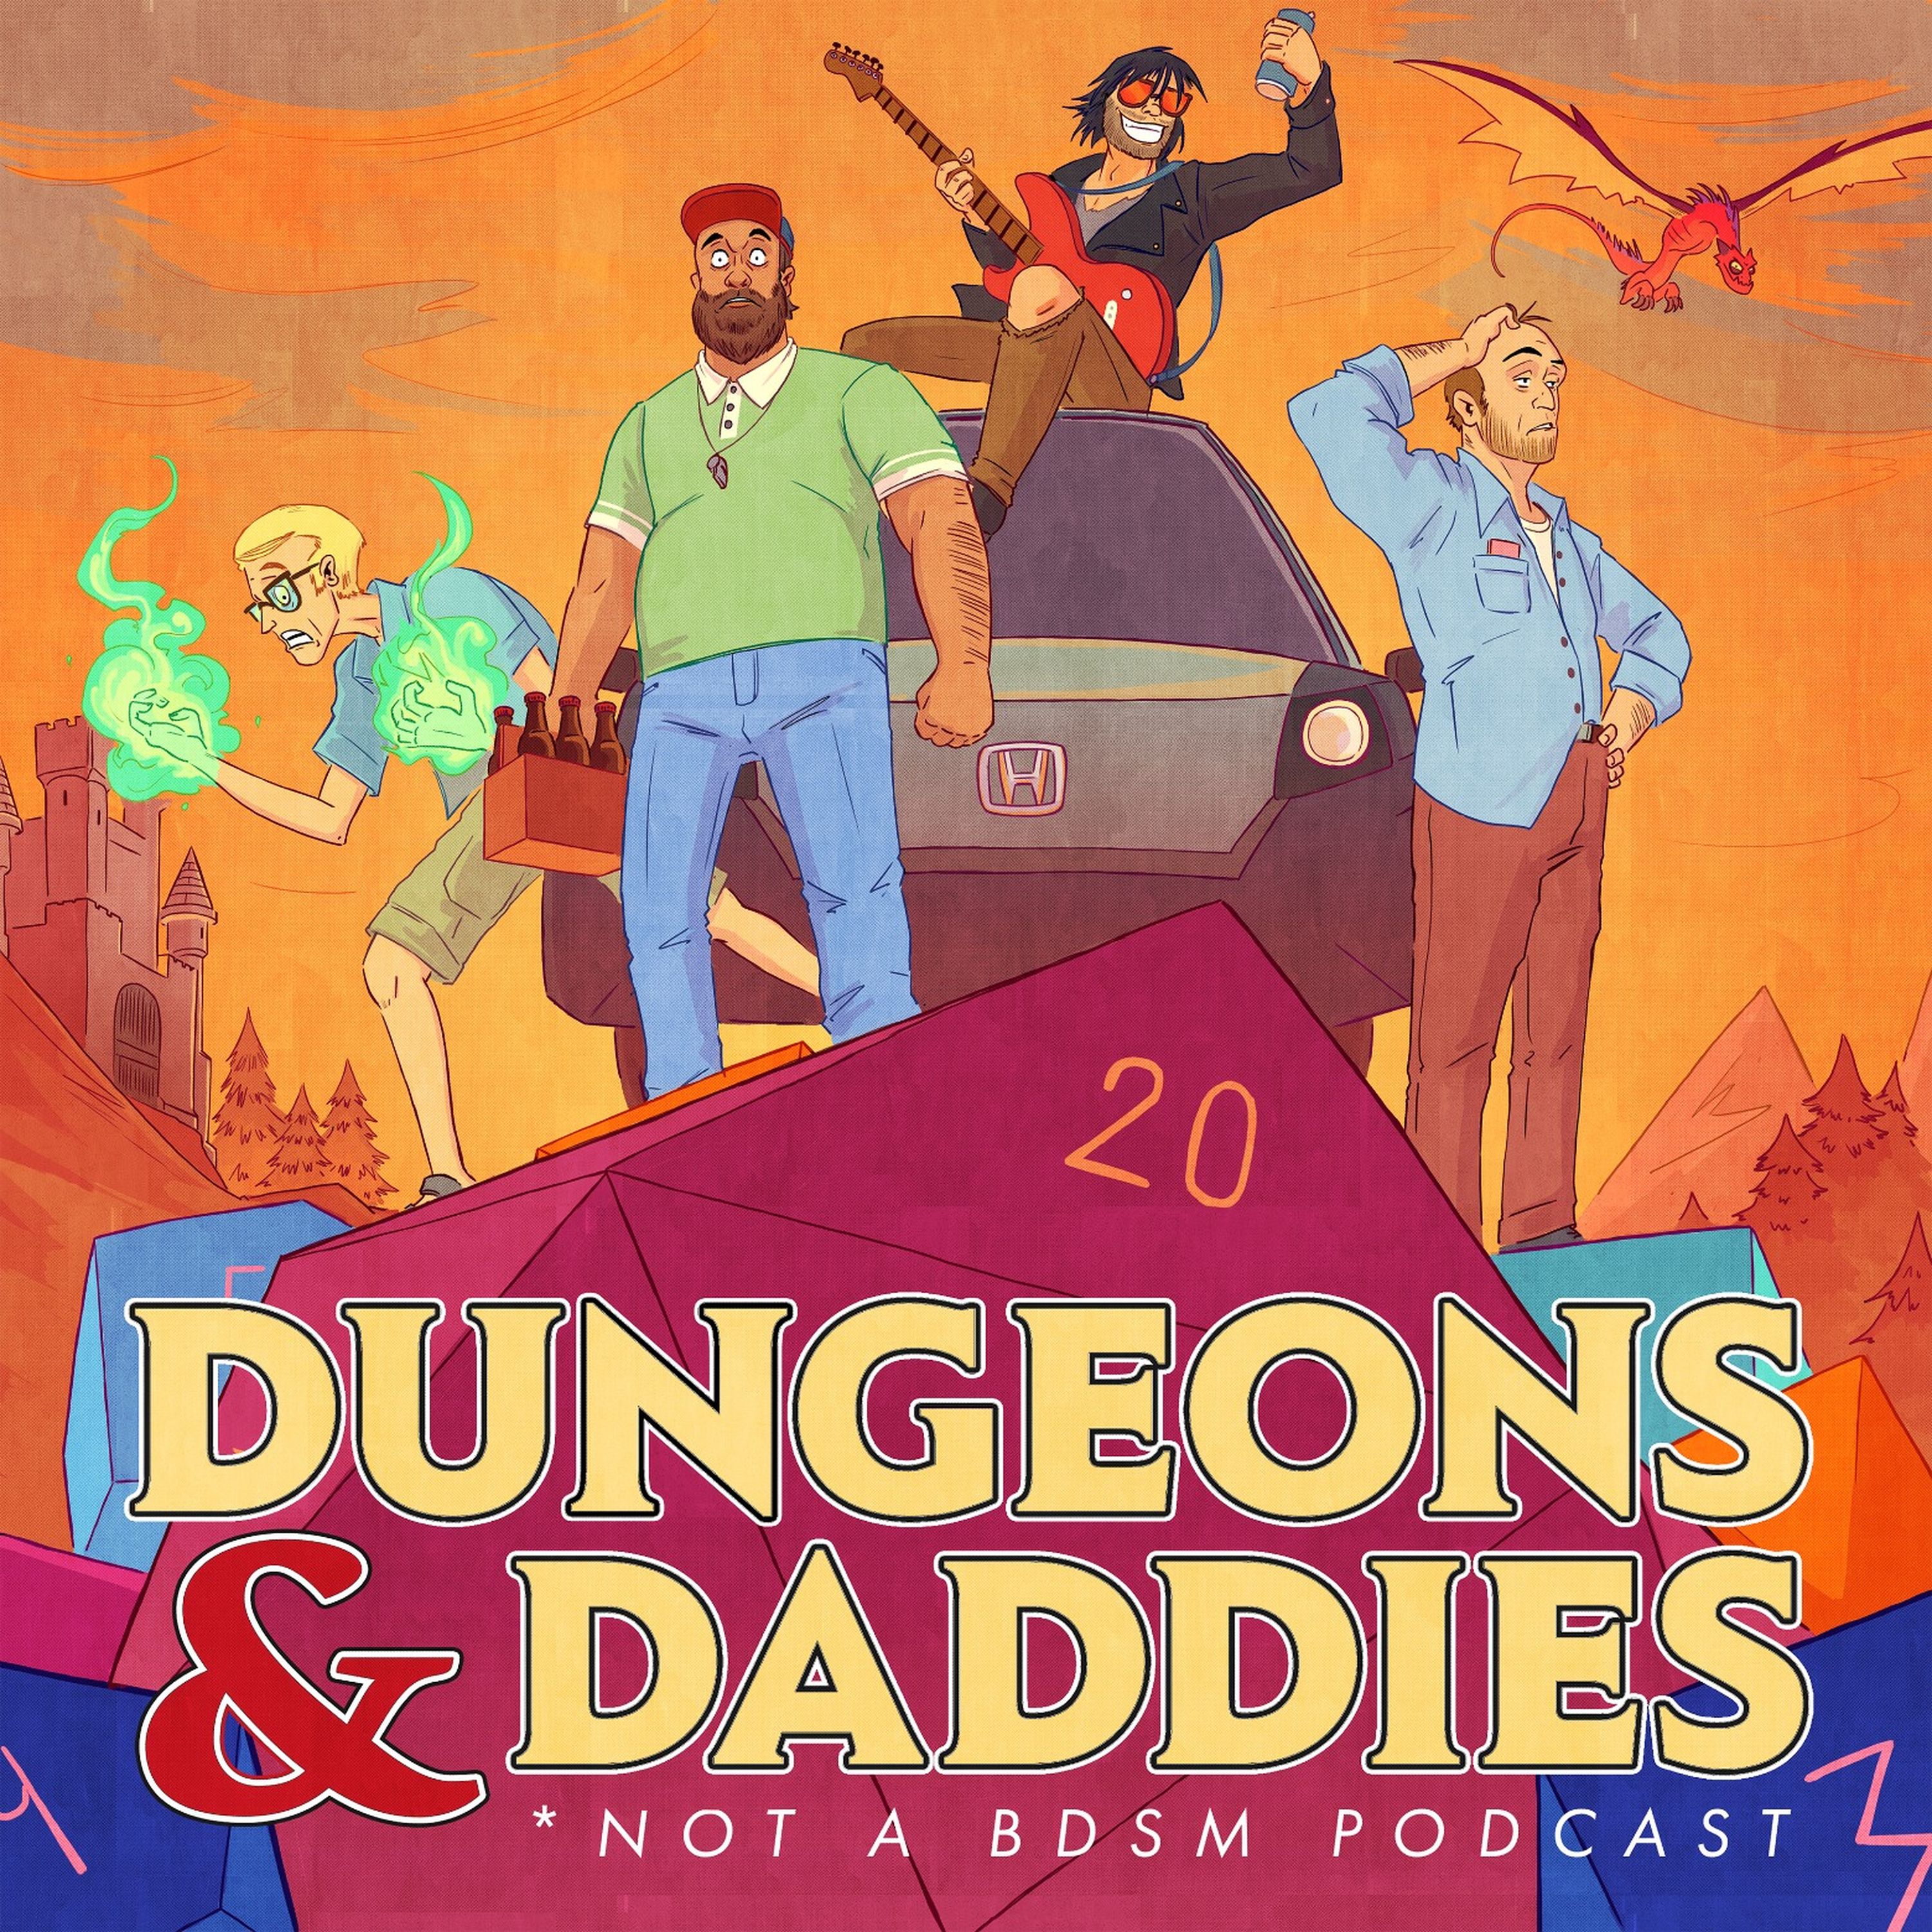 Ep. 20 - Silent, But Dadly